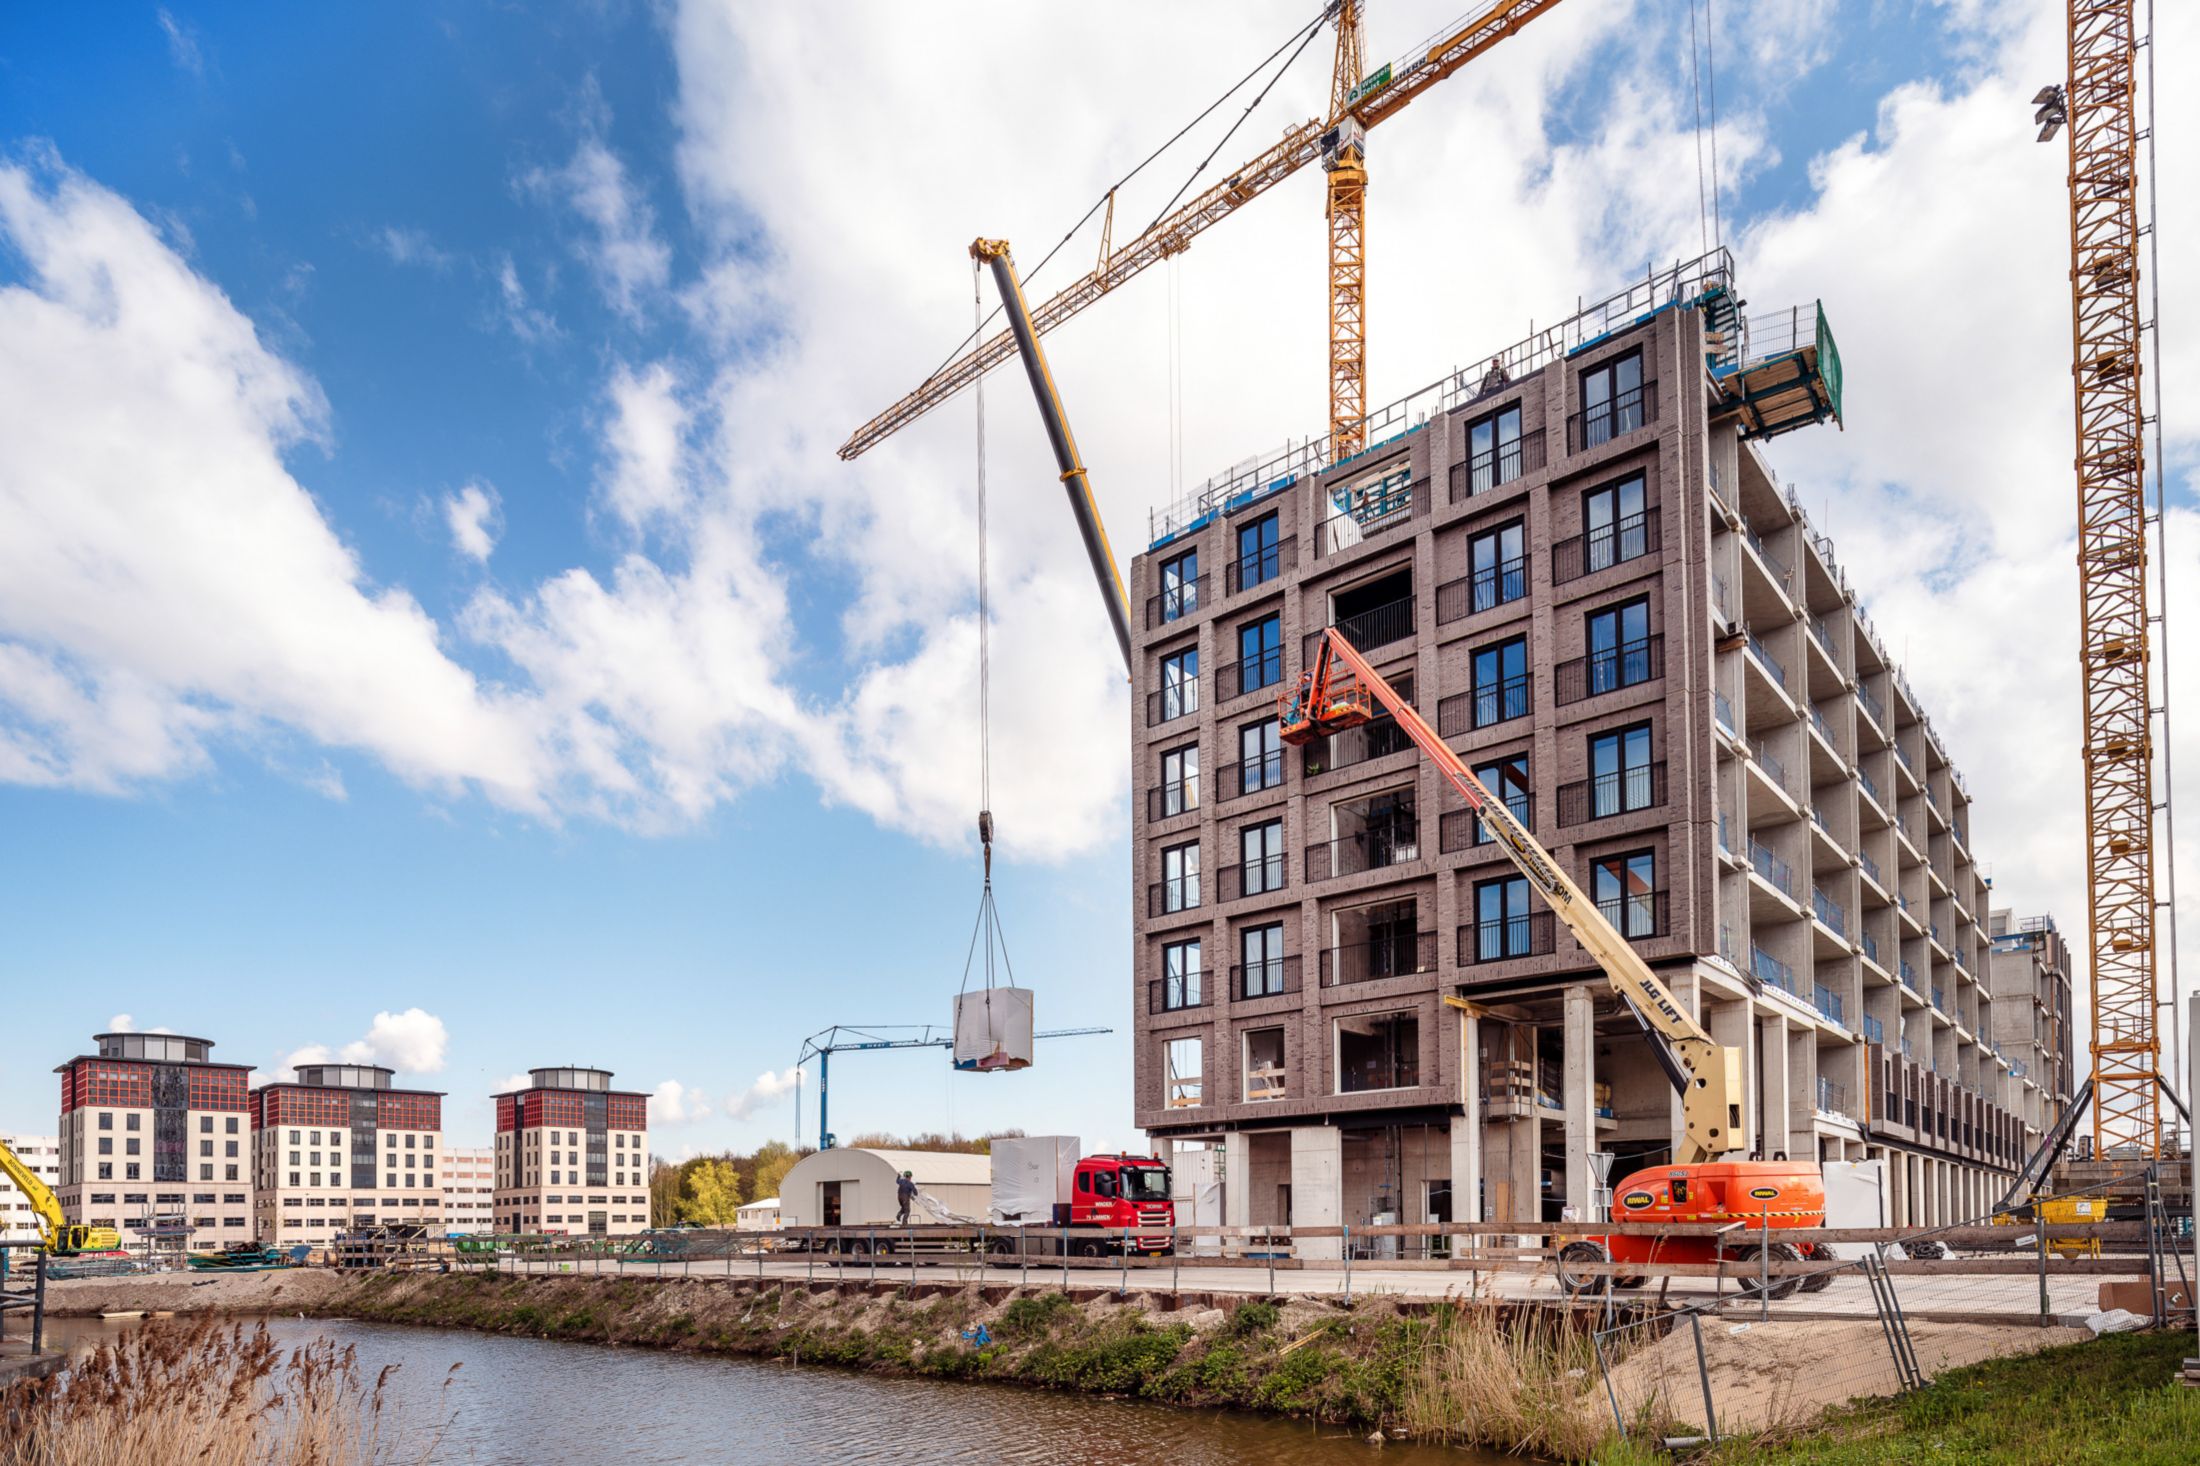 Construction site of the Ourdomain new build apartments in Amsterdam, Netherlands